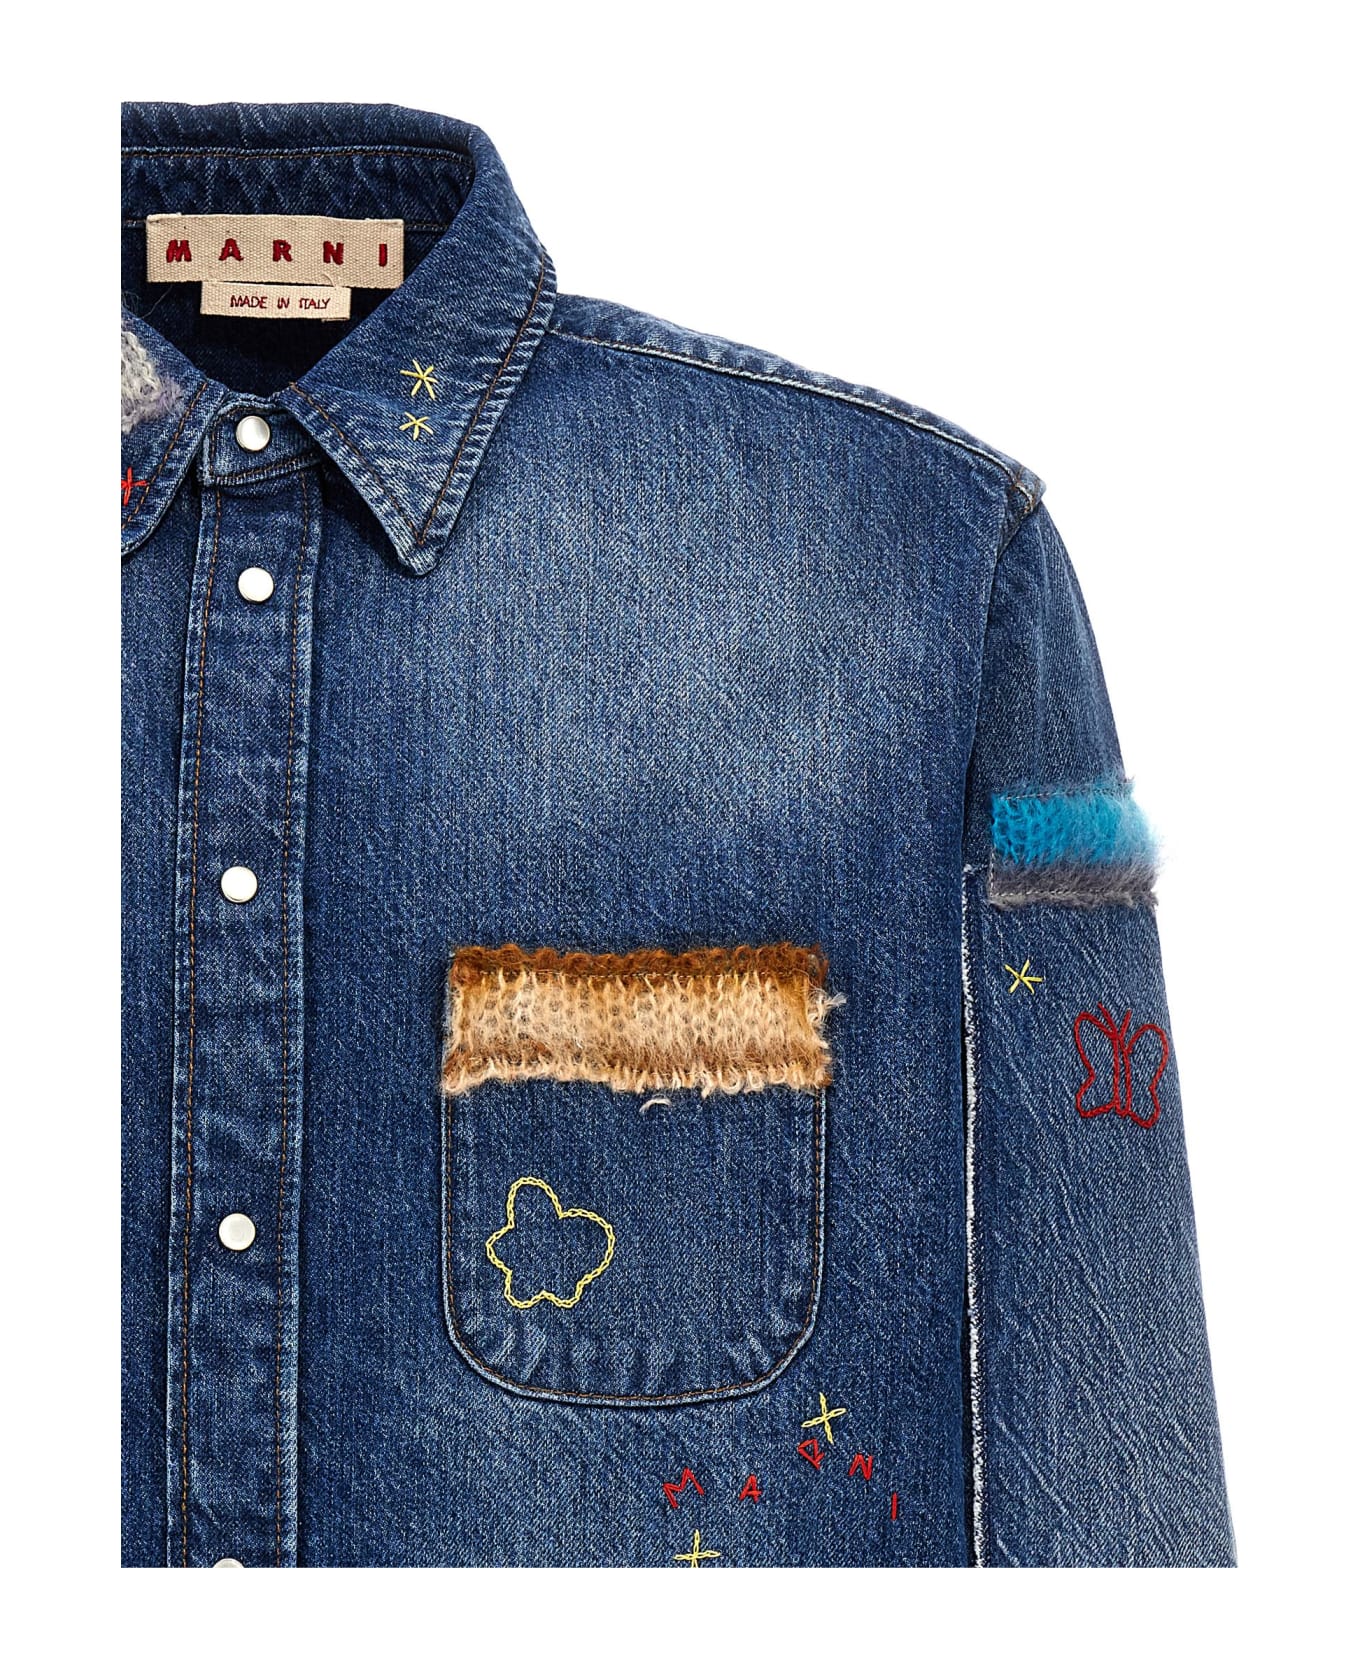 Marni choker Denim Shirt, Embroidery And Patches - BLUE/MULTICOLOUR